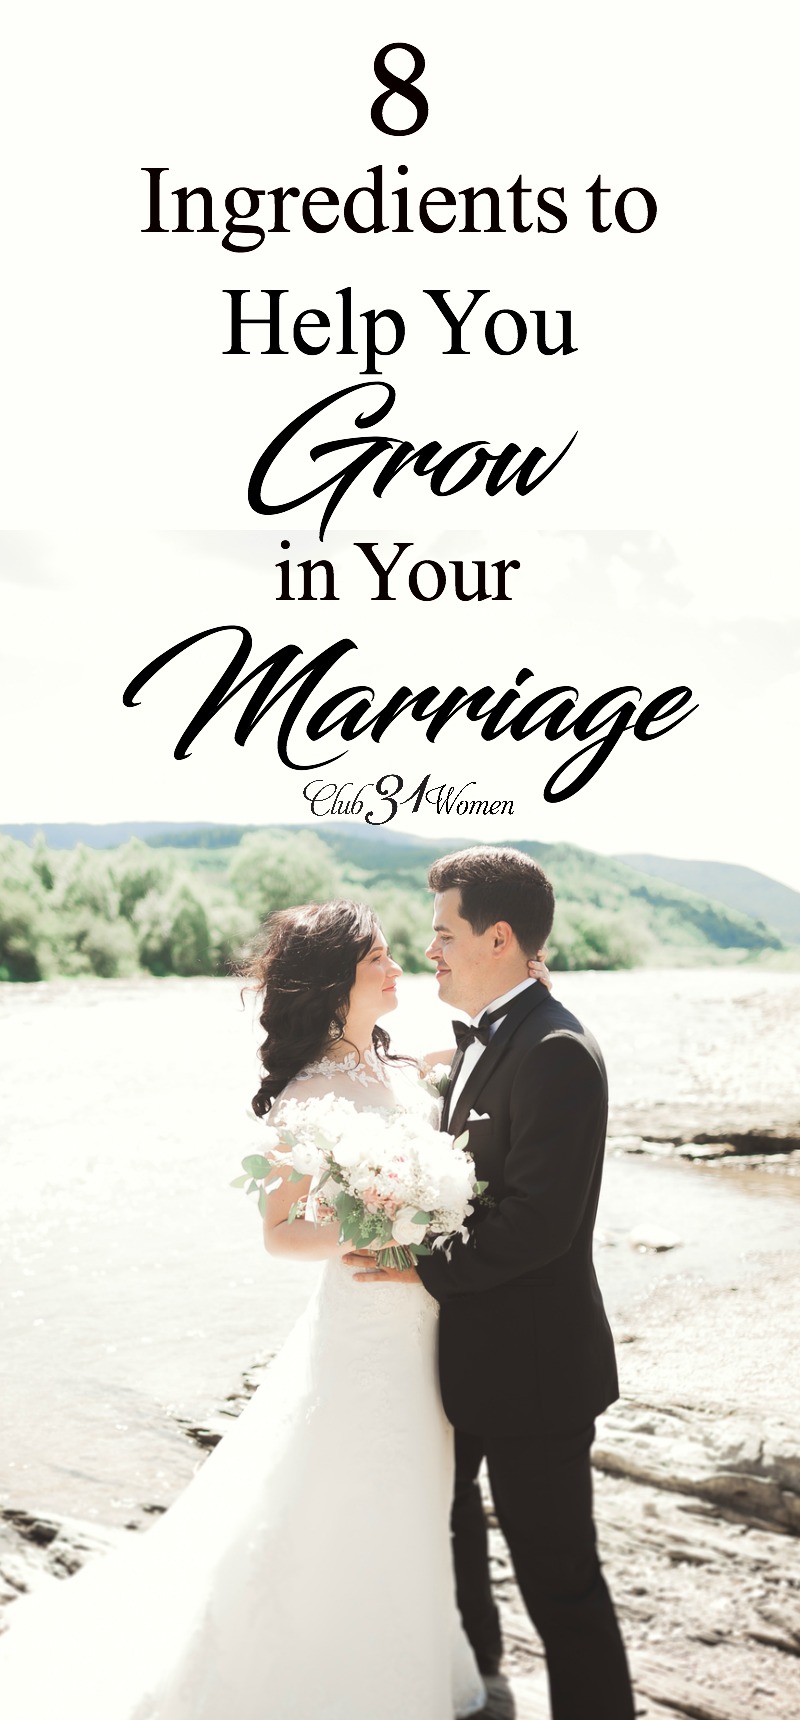 What does it take to make your marriage grow? There are some key ingredients that will help you build a strong, lasting marriage! via @Club31Women